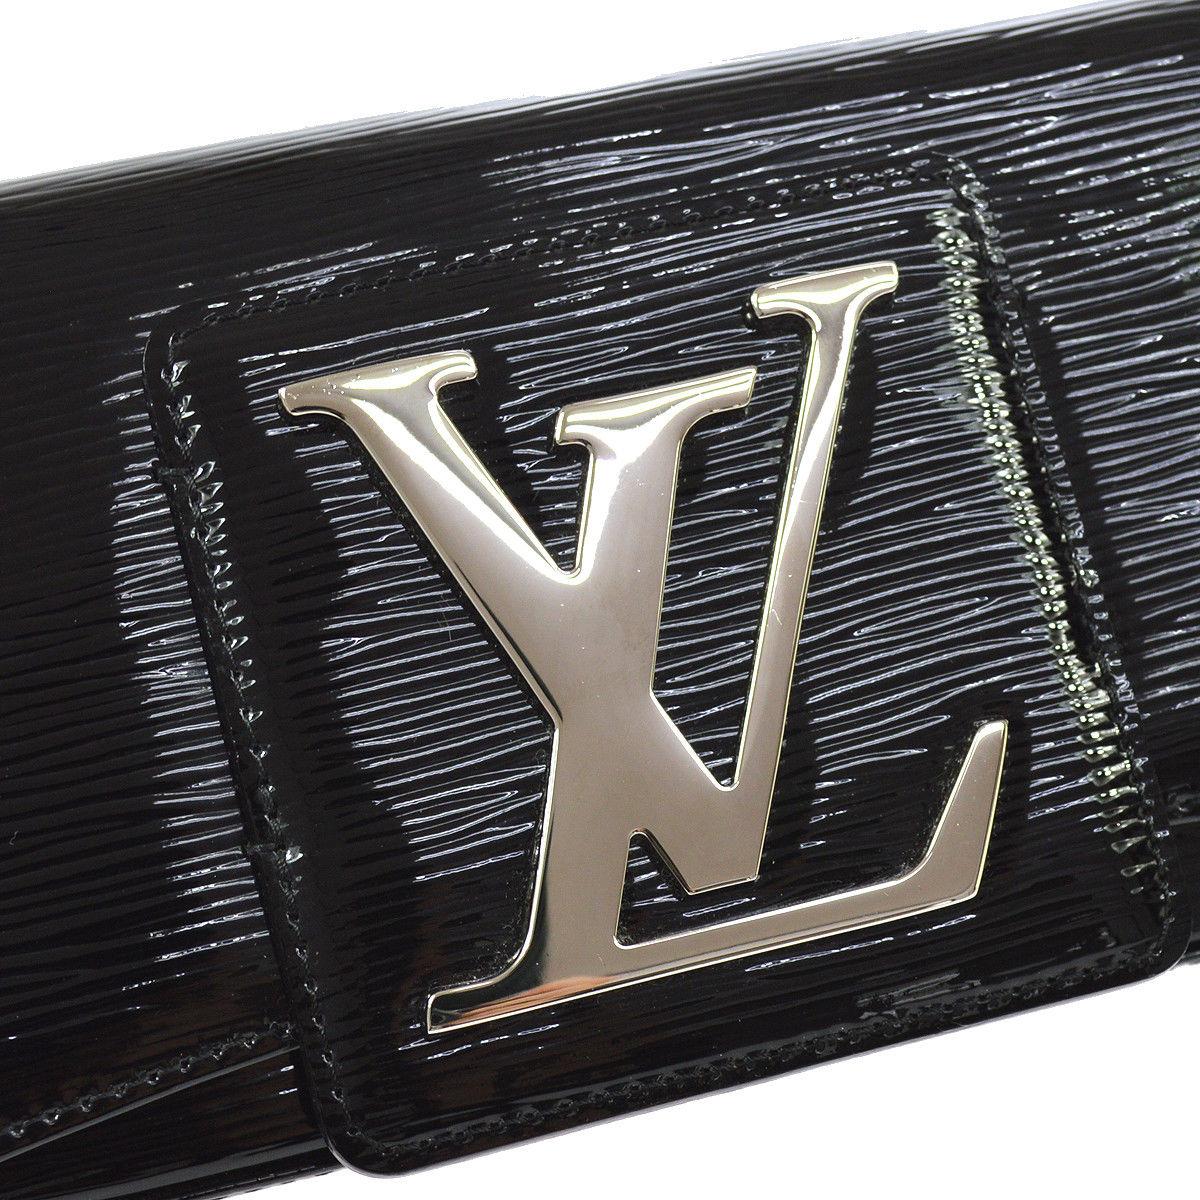 Louis Vuitton Black Patent Leather Large Silver LV Evening Clutch Flap Bag

Patent leather
Silver tone hardware
Snap closure
Woven lining
Made in Spain
Measure 10